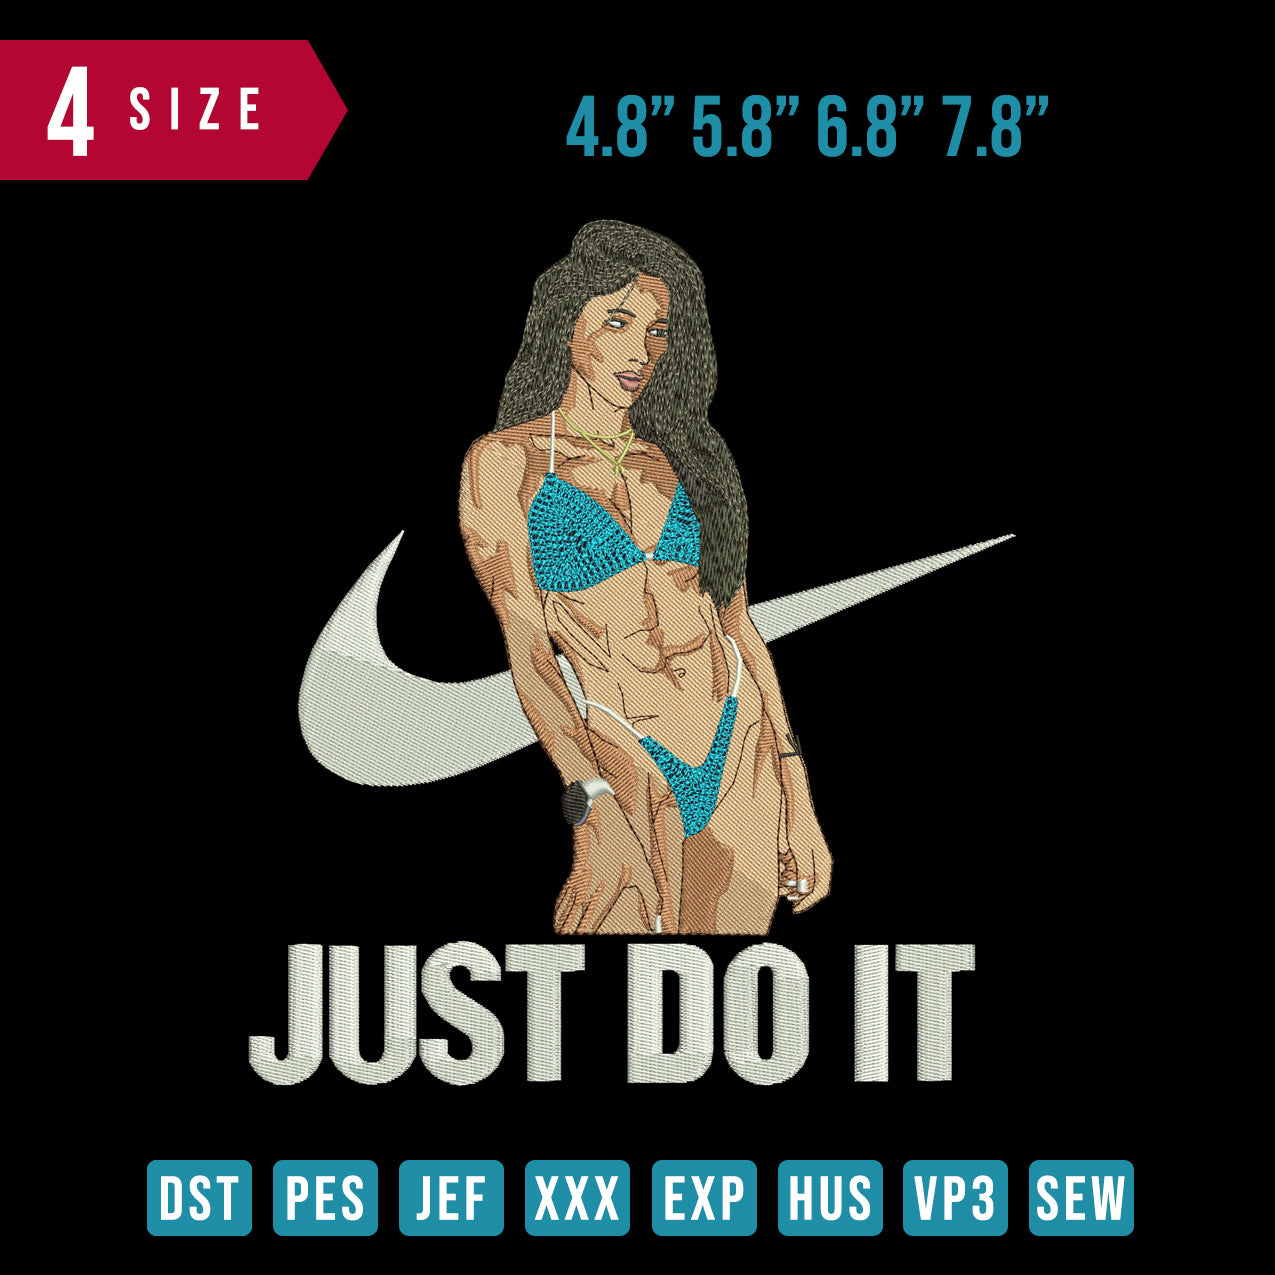 Girl  sexy just do it